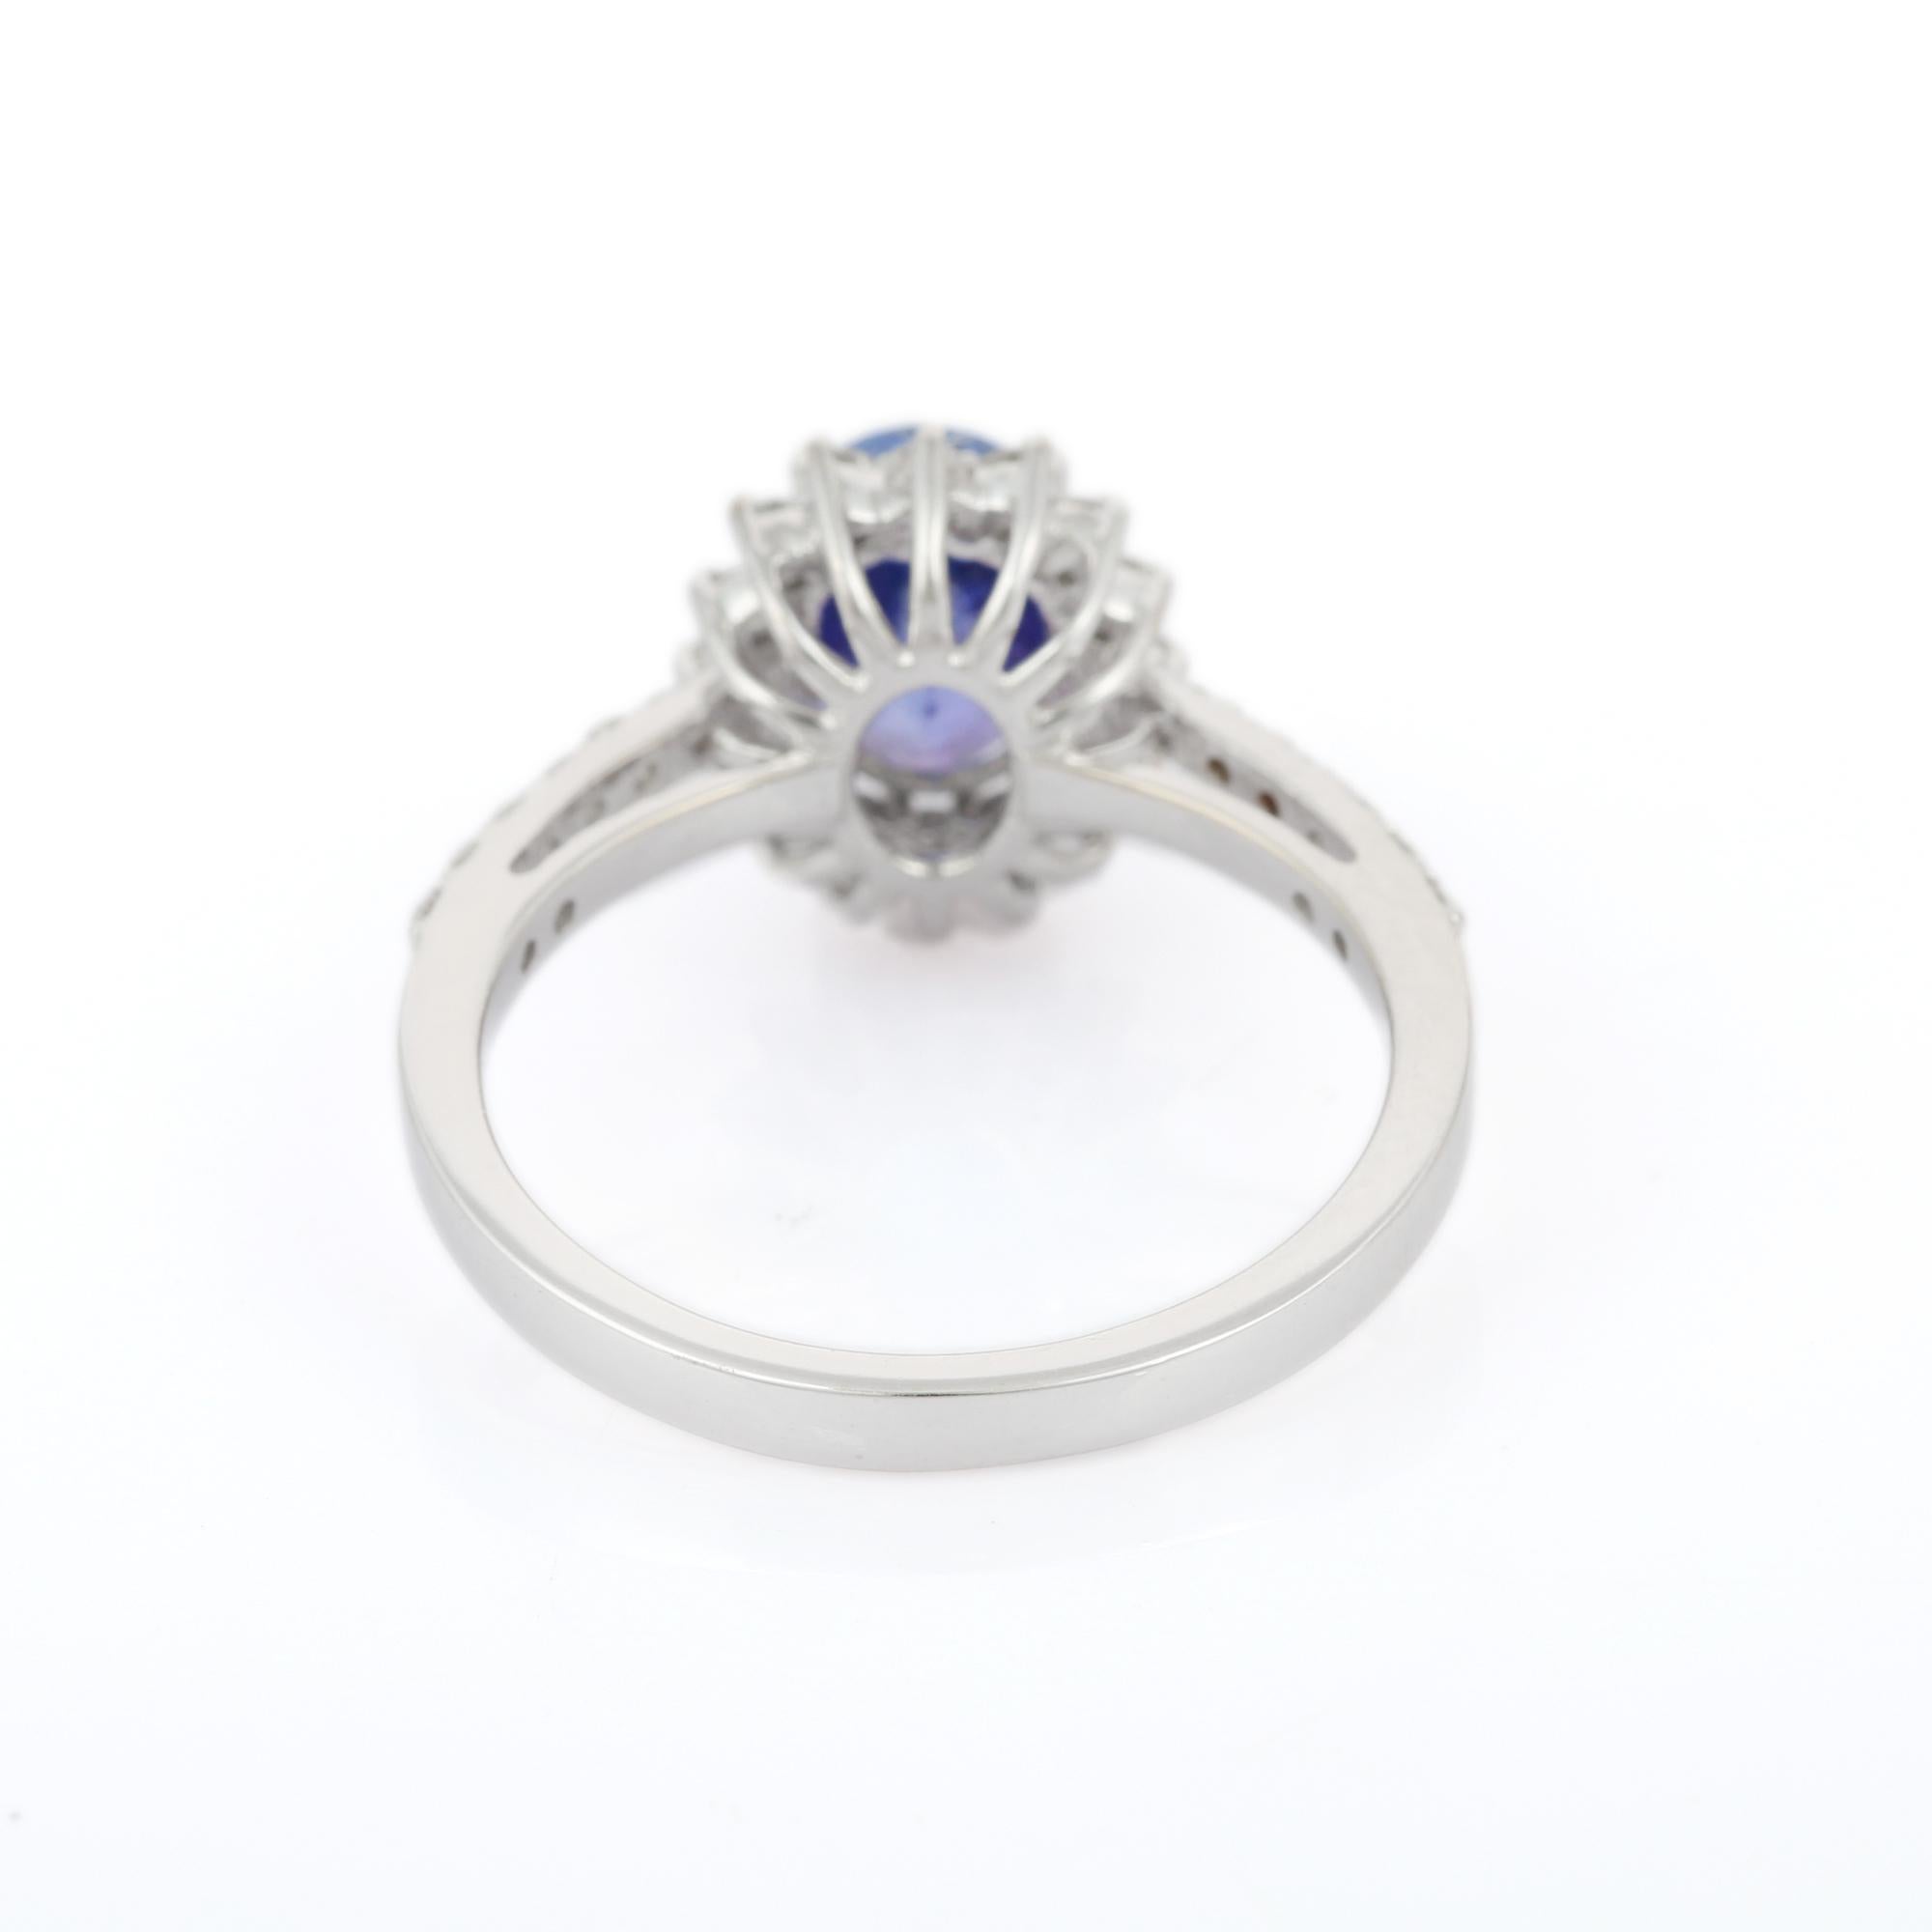 For Sale:  1.59 Carat Natural Tanzanite and Diamond Ring in 18k Solid White Gold 4